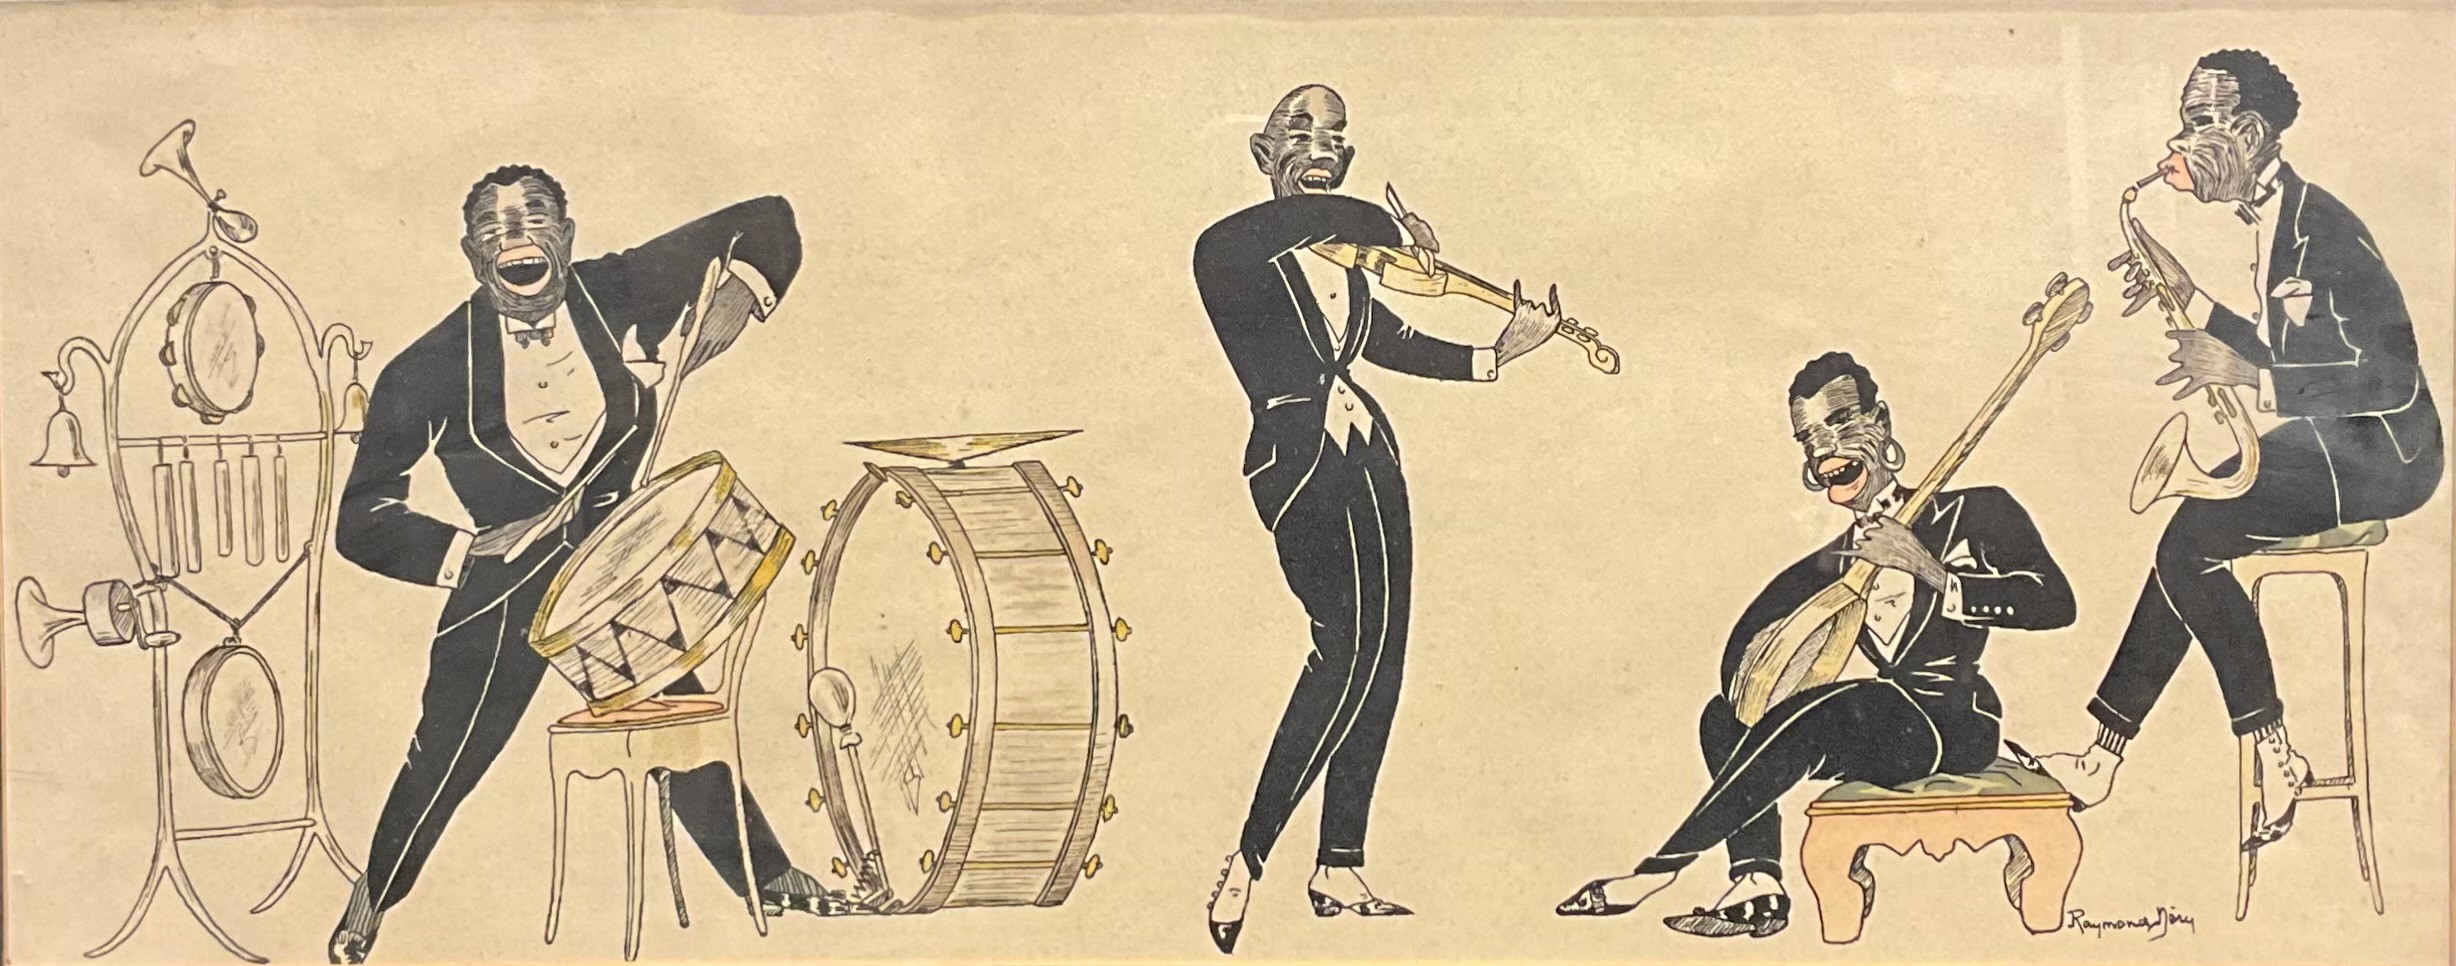 Raymond Dery, by and after, Jazz Band lithograph, 23cm x 57cm